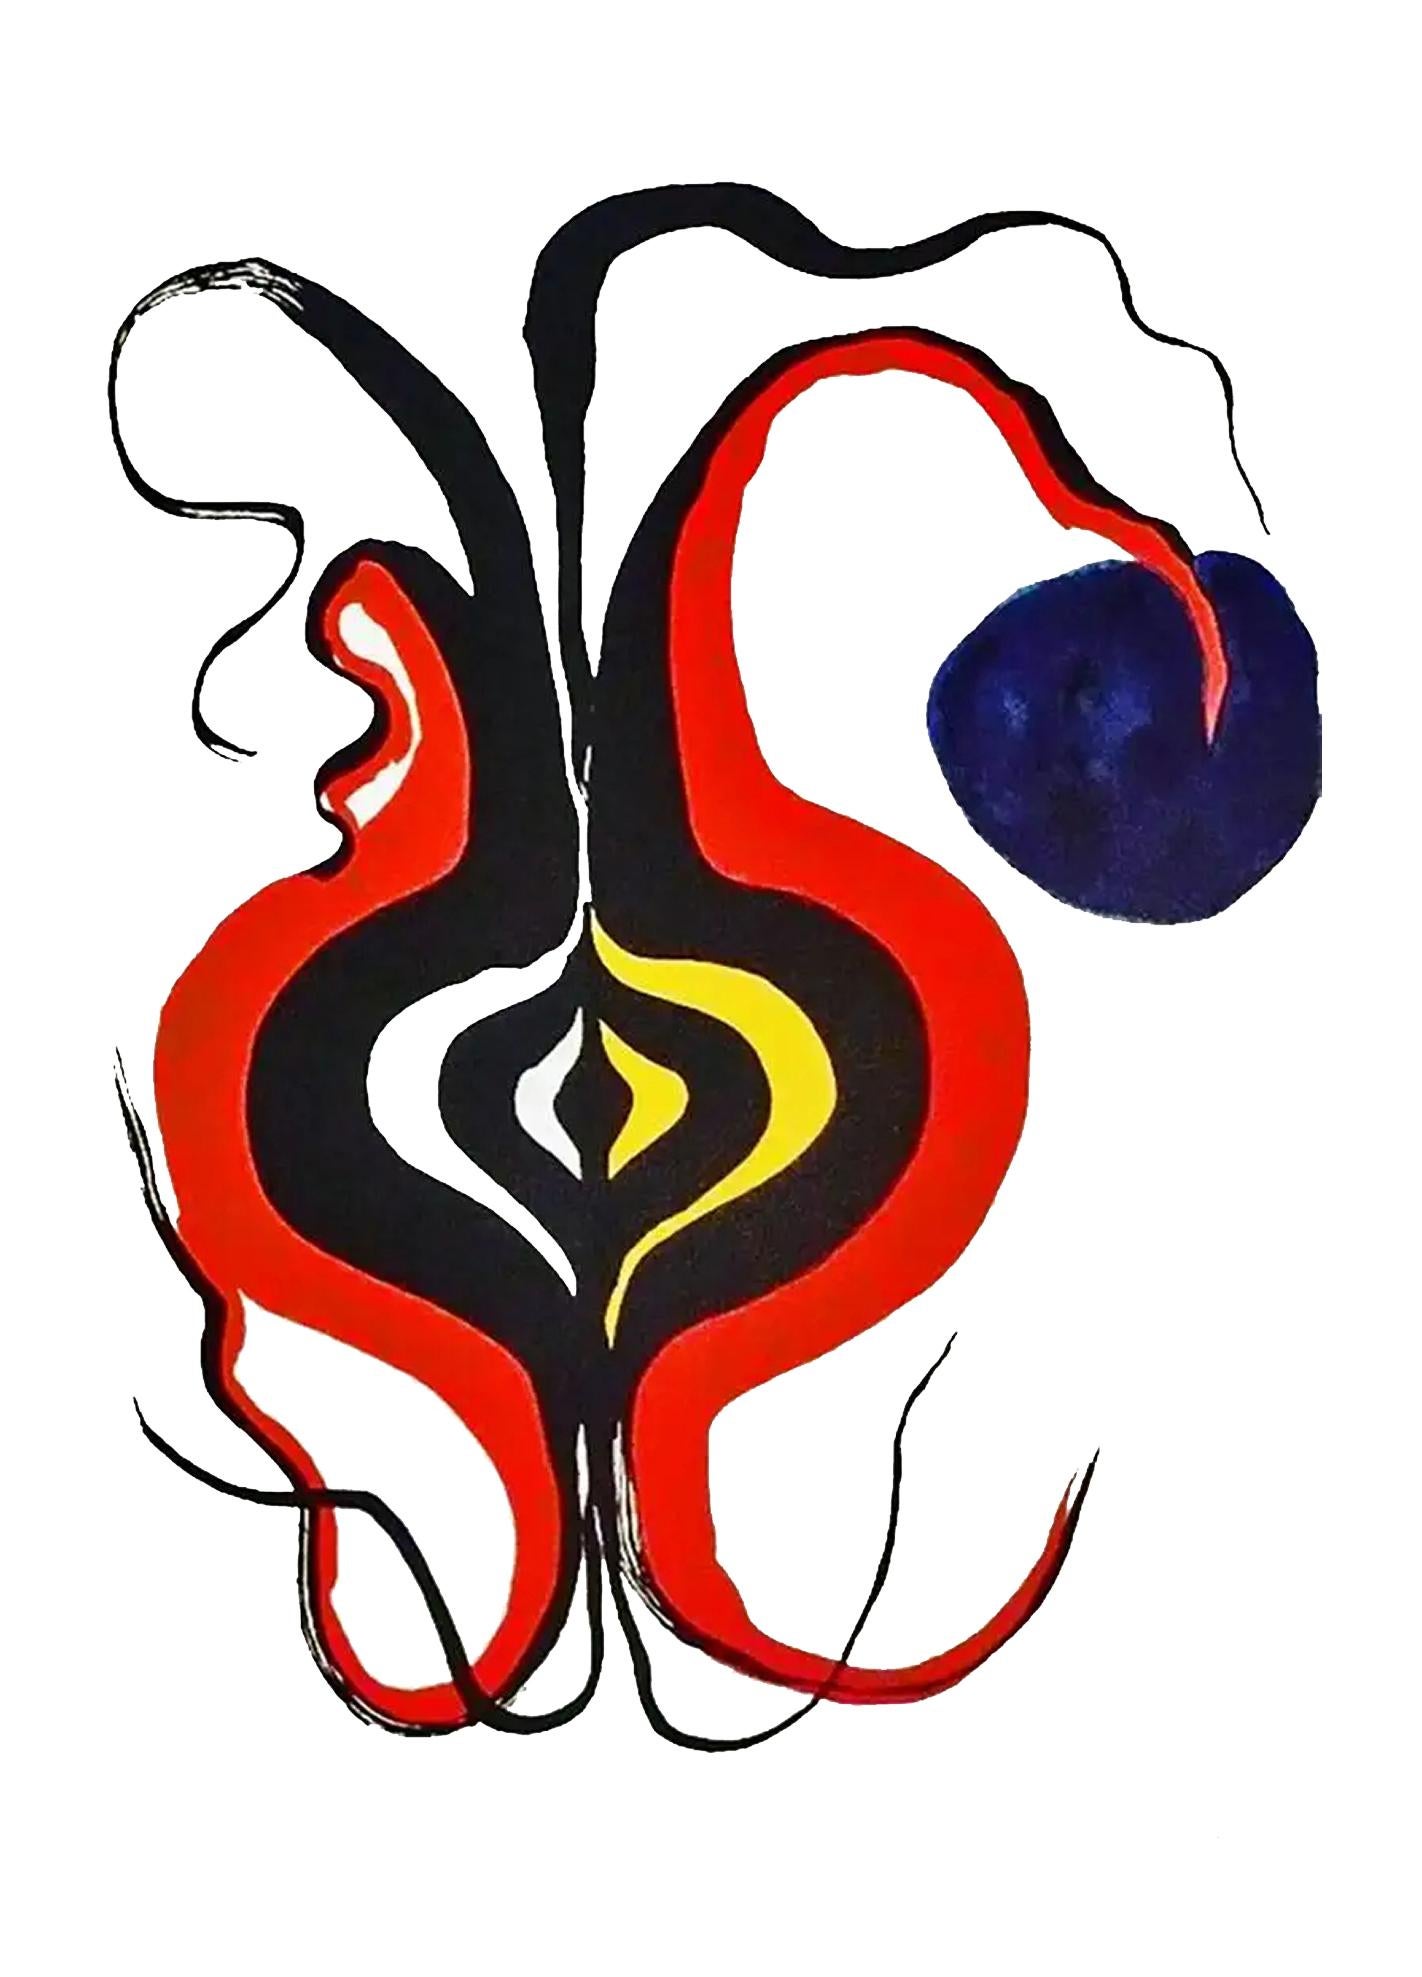 Alexander Calder Lithograph c. 1967 from Derrière le miroir:

Lithograph in colors; 15 x 11 inches.
Good overall vintage condition; some minor bending to lower left corner. 
Unsigned from an edition of unknown.
From: Derrière le miroir Published by: